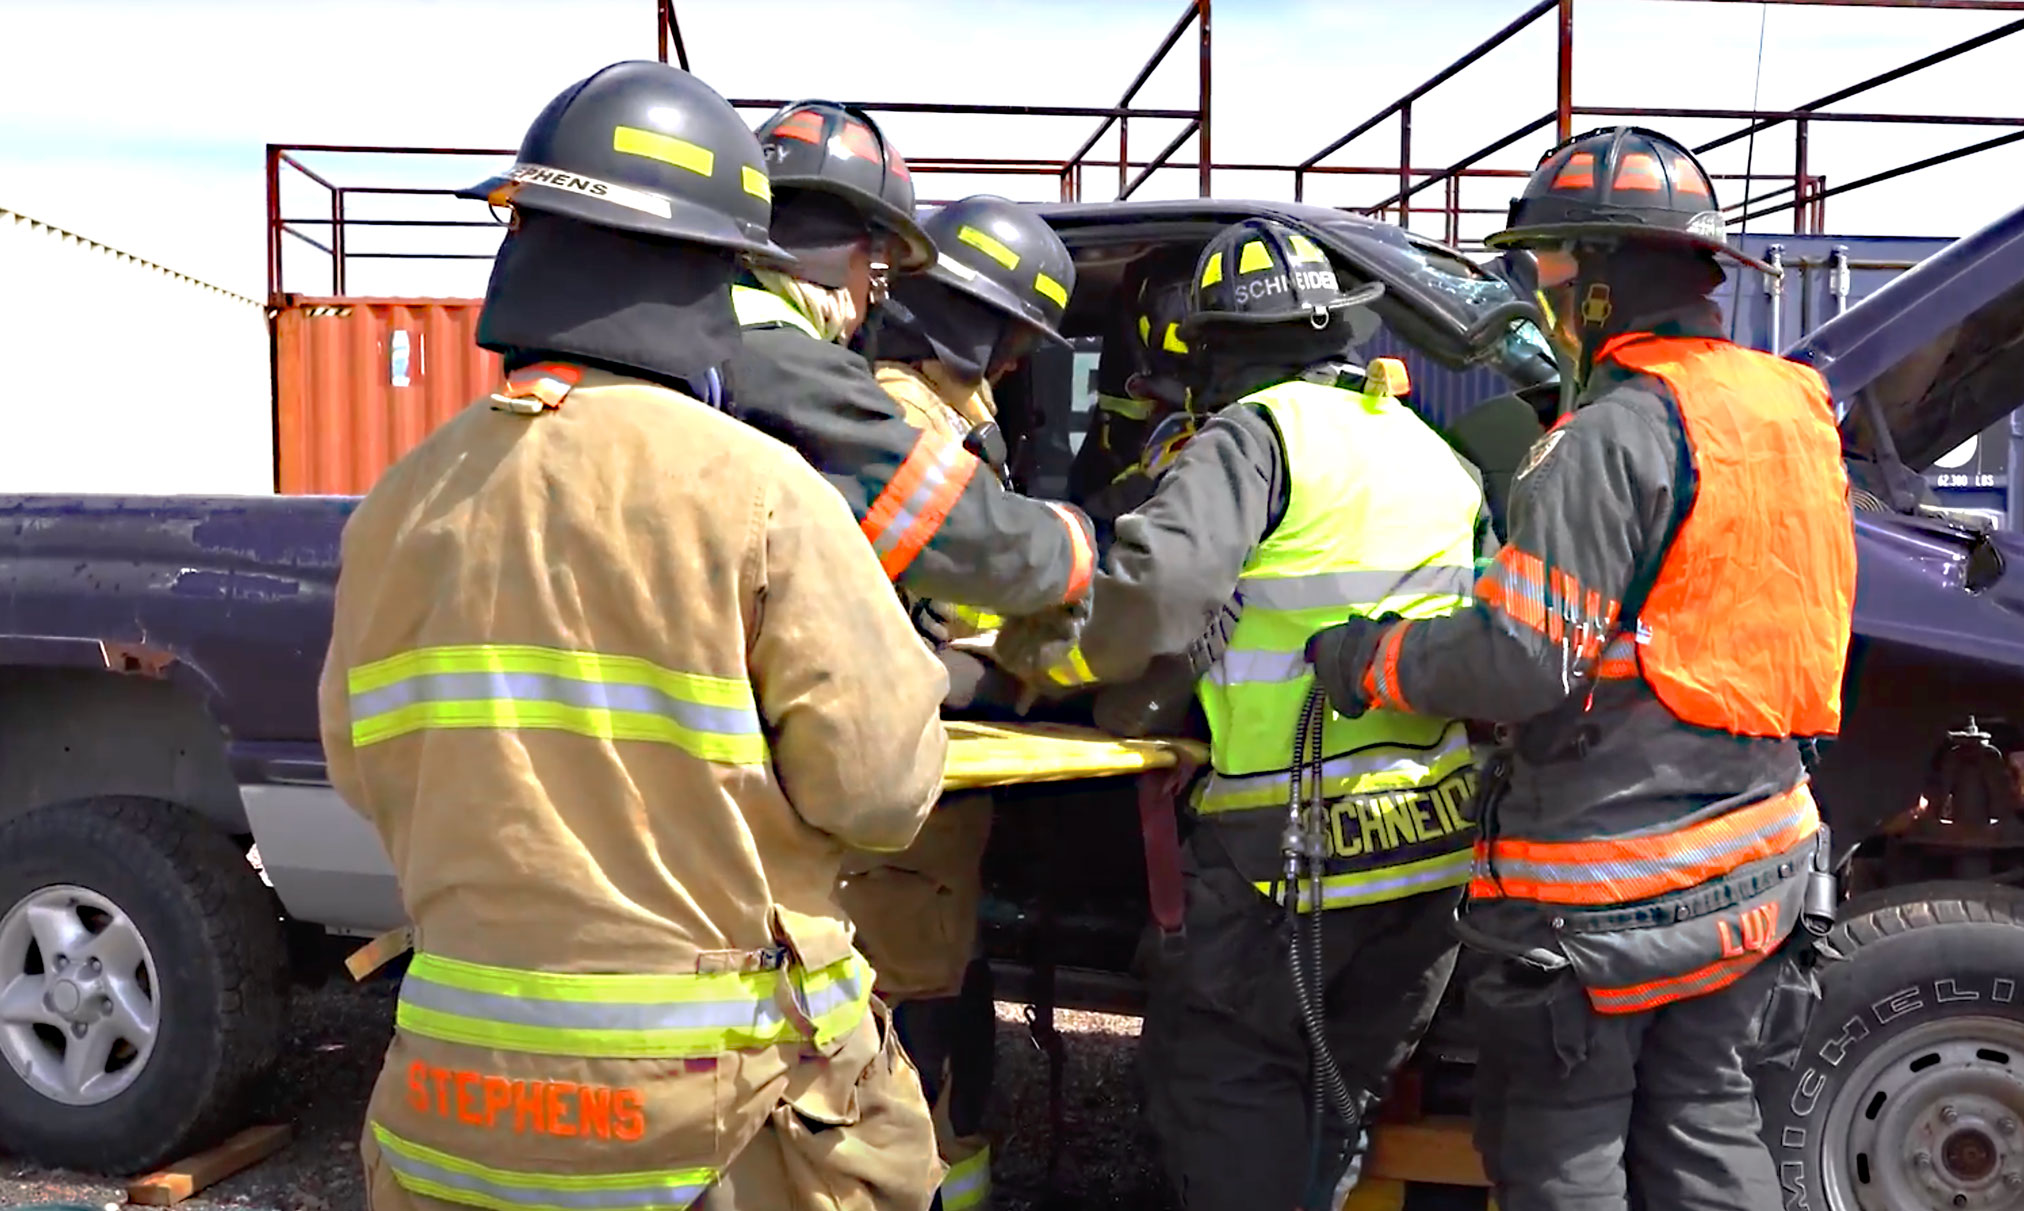 Featured image for “Vehicle Extrication Training Course Using Jaws of Life”